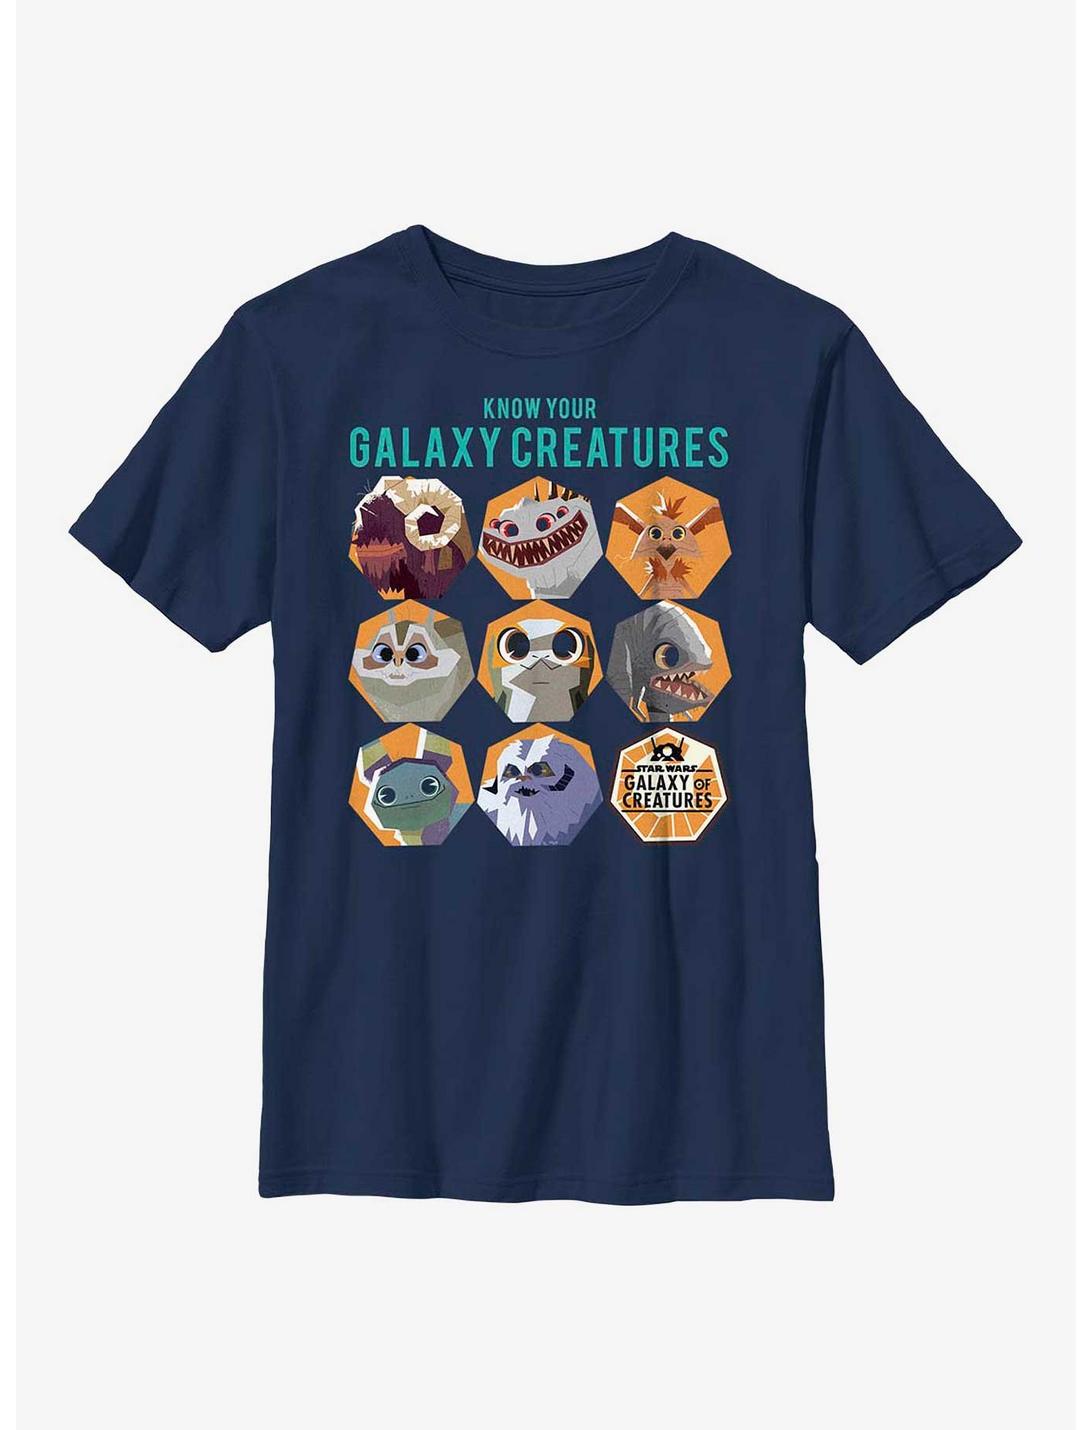 Star Wars Galaxy Of Creatures Creature Chart Youth T-Shirt, NAVY, hi-res